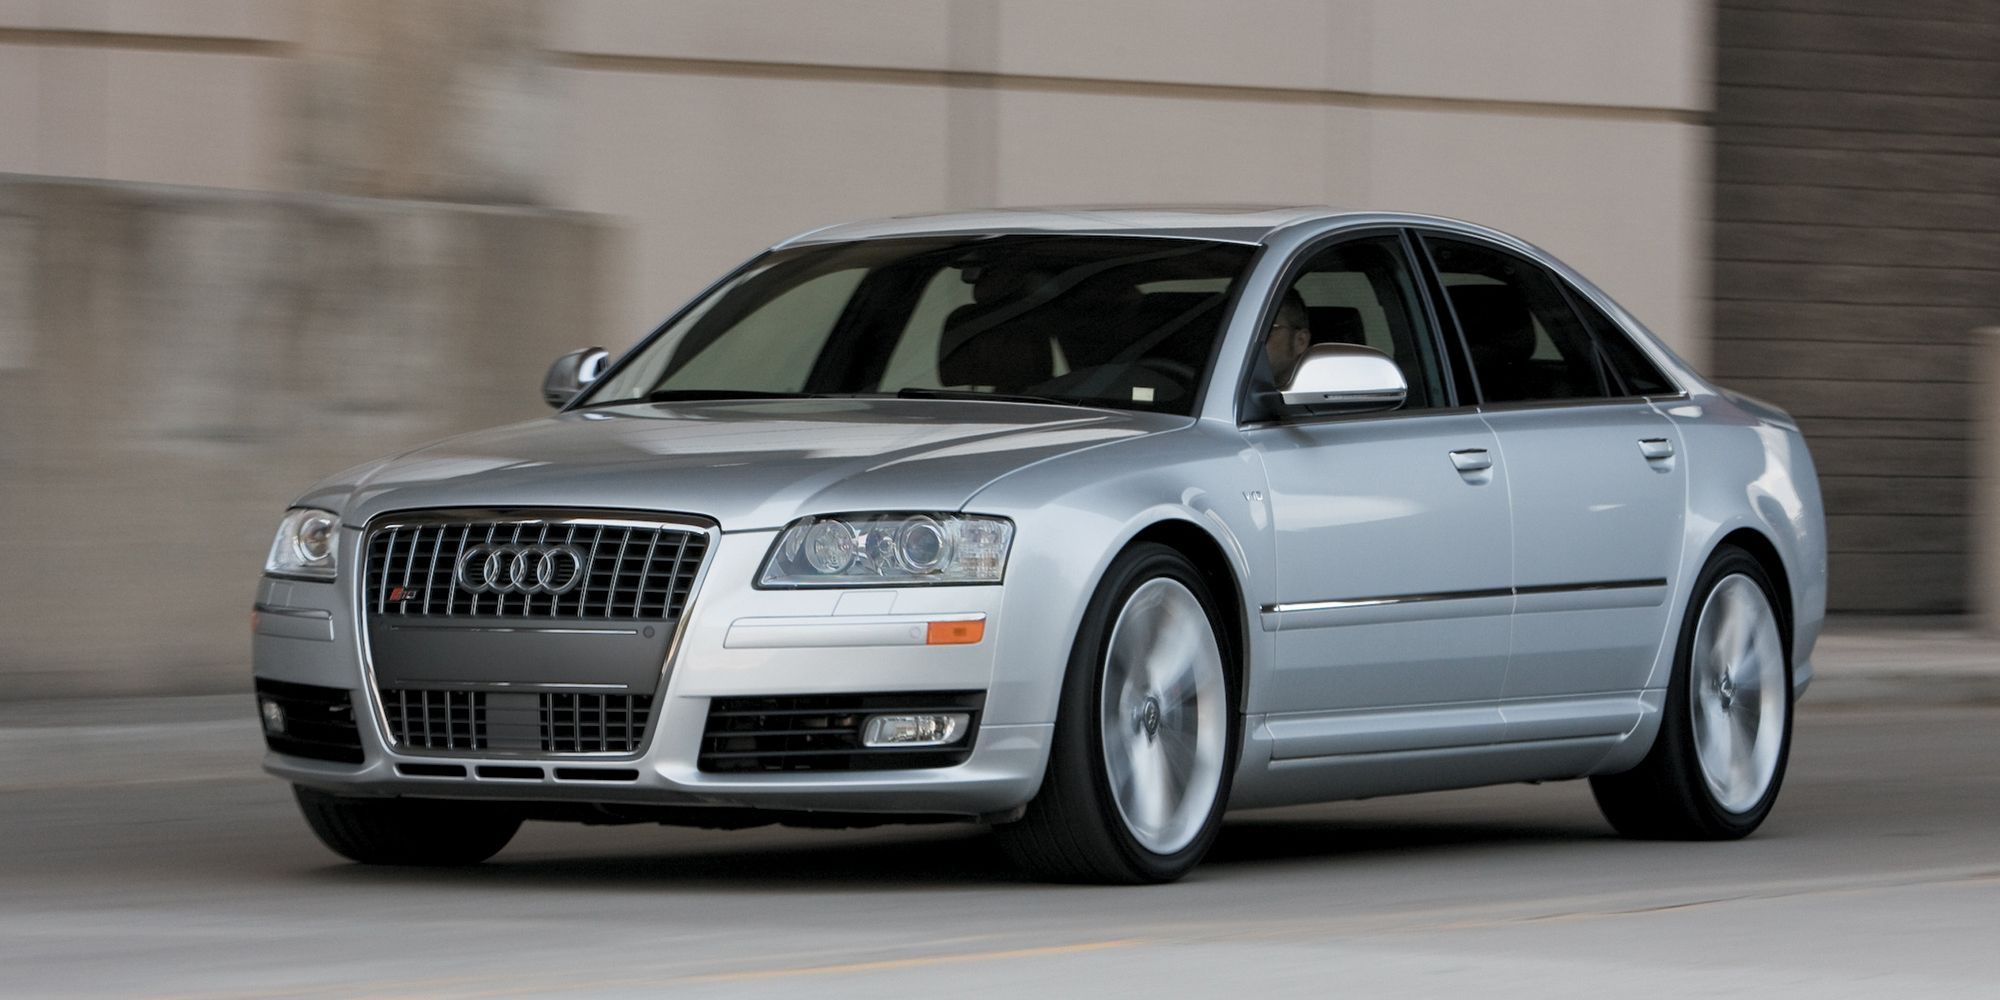 The front of a D3 Audi S8